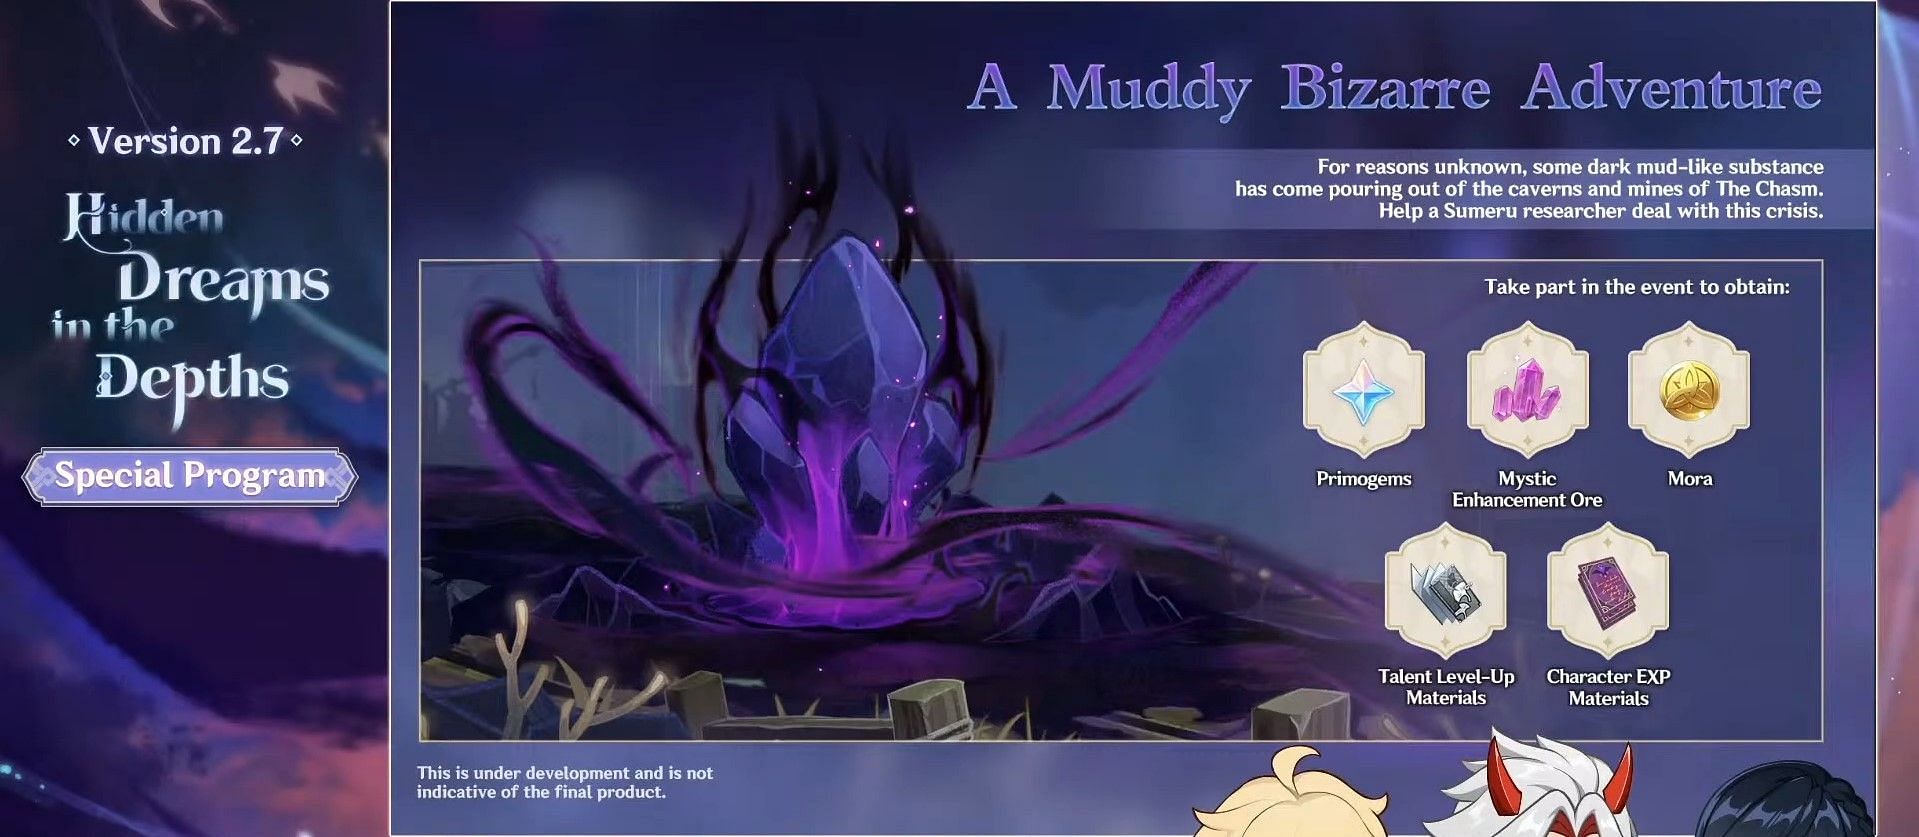 A Muddy Bizarre Adventure will also take place in The Chasm (Image via miHoYo)